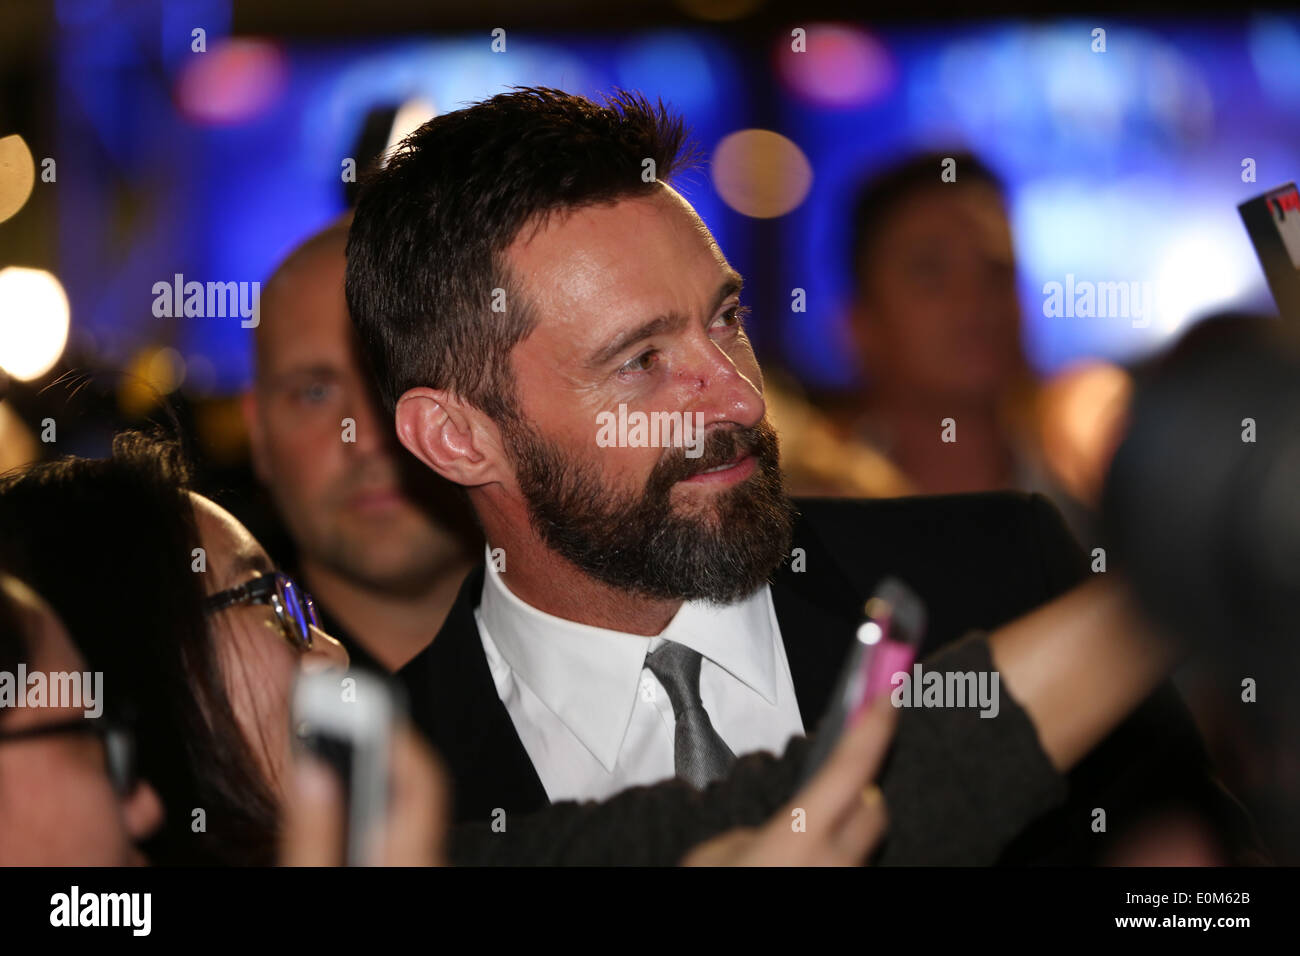 Hugh Jackman taking selfies with fans at the X-Men premiere, Melbourne, May 16, 2014. Stock Photo